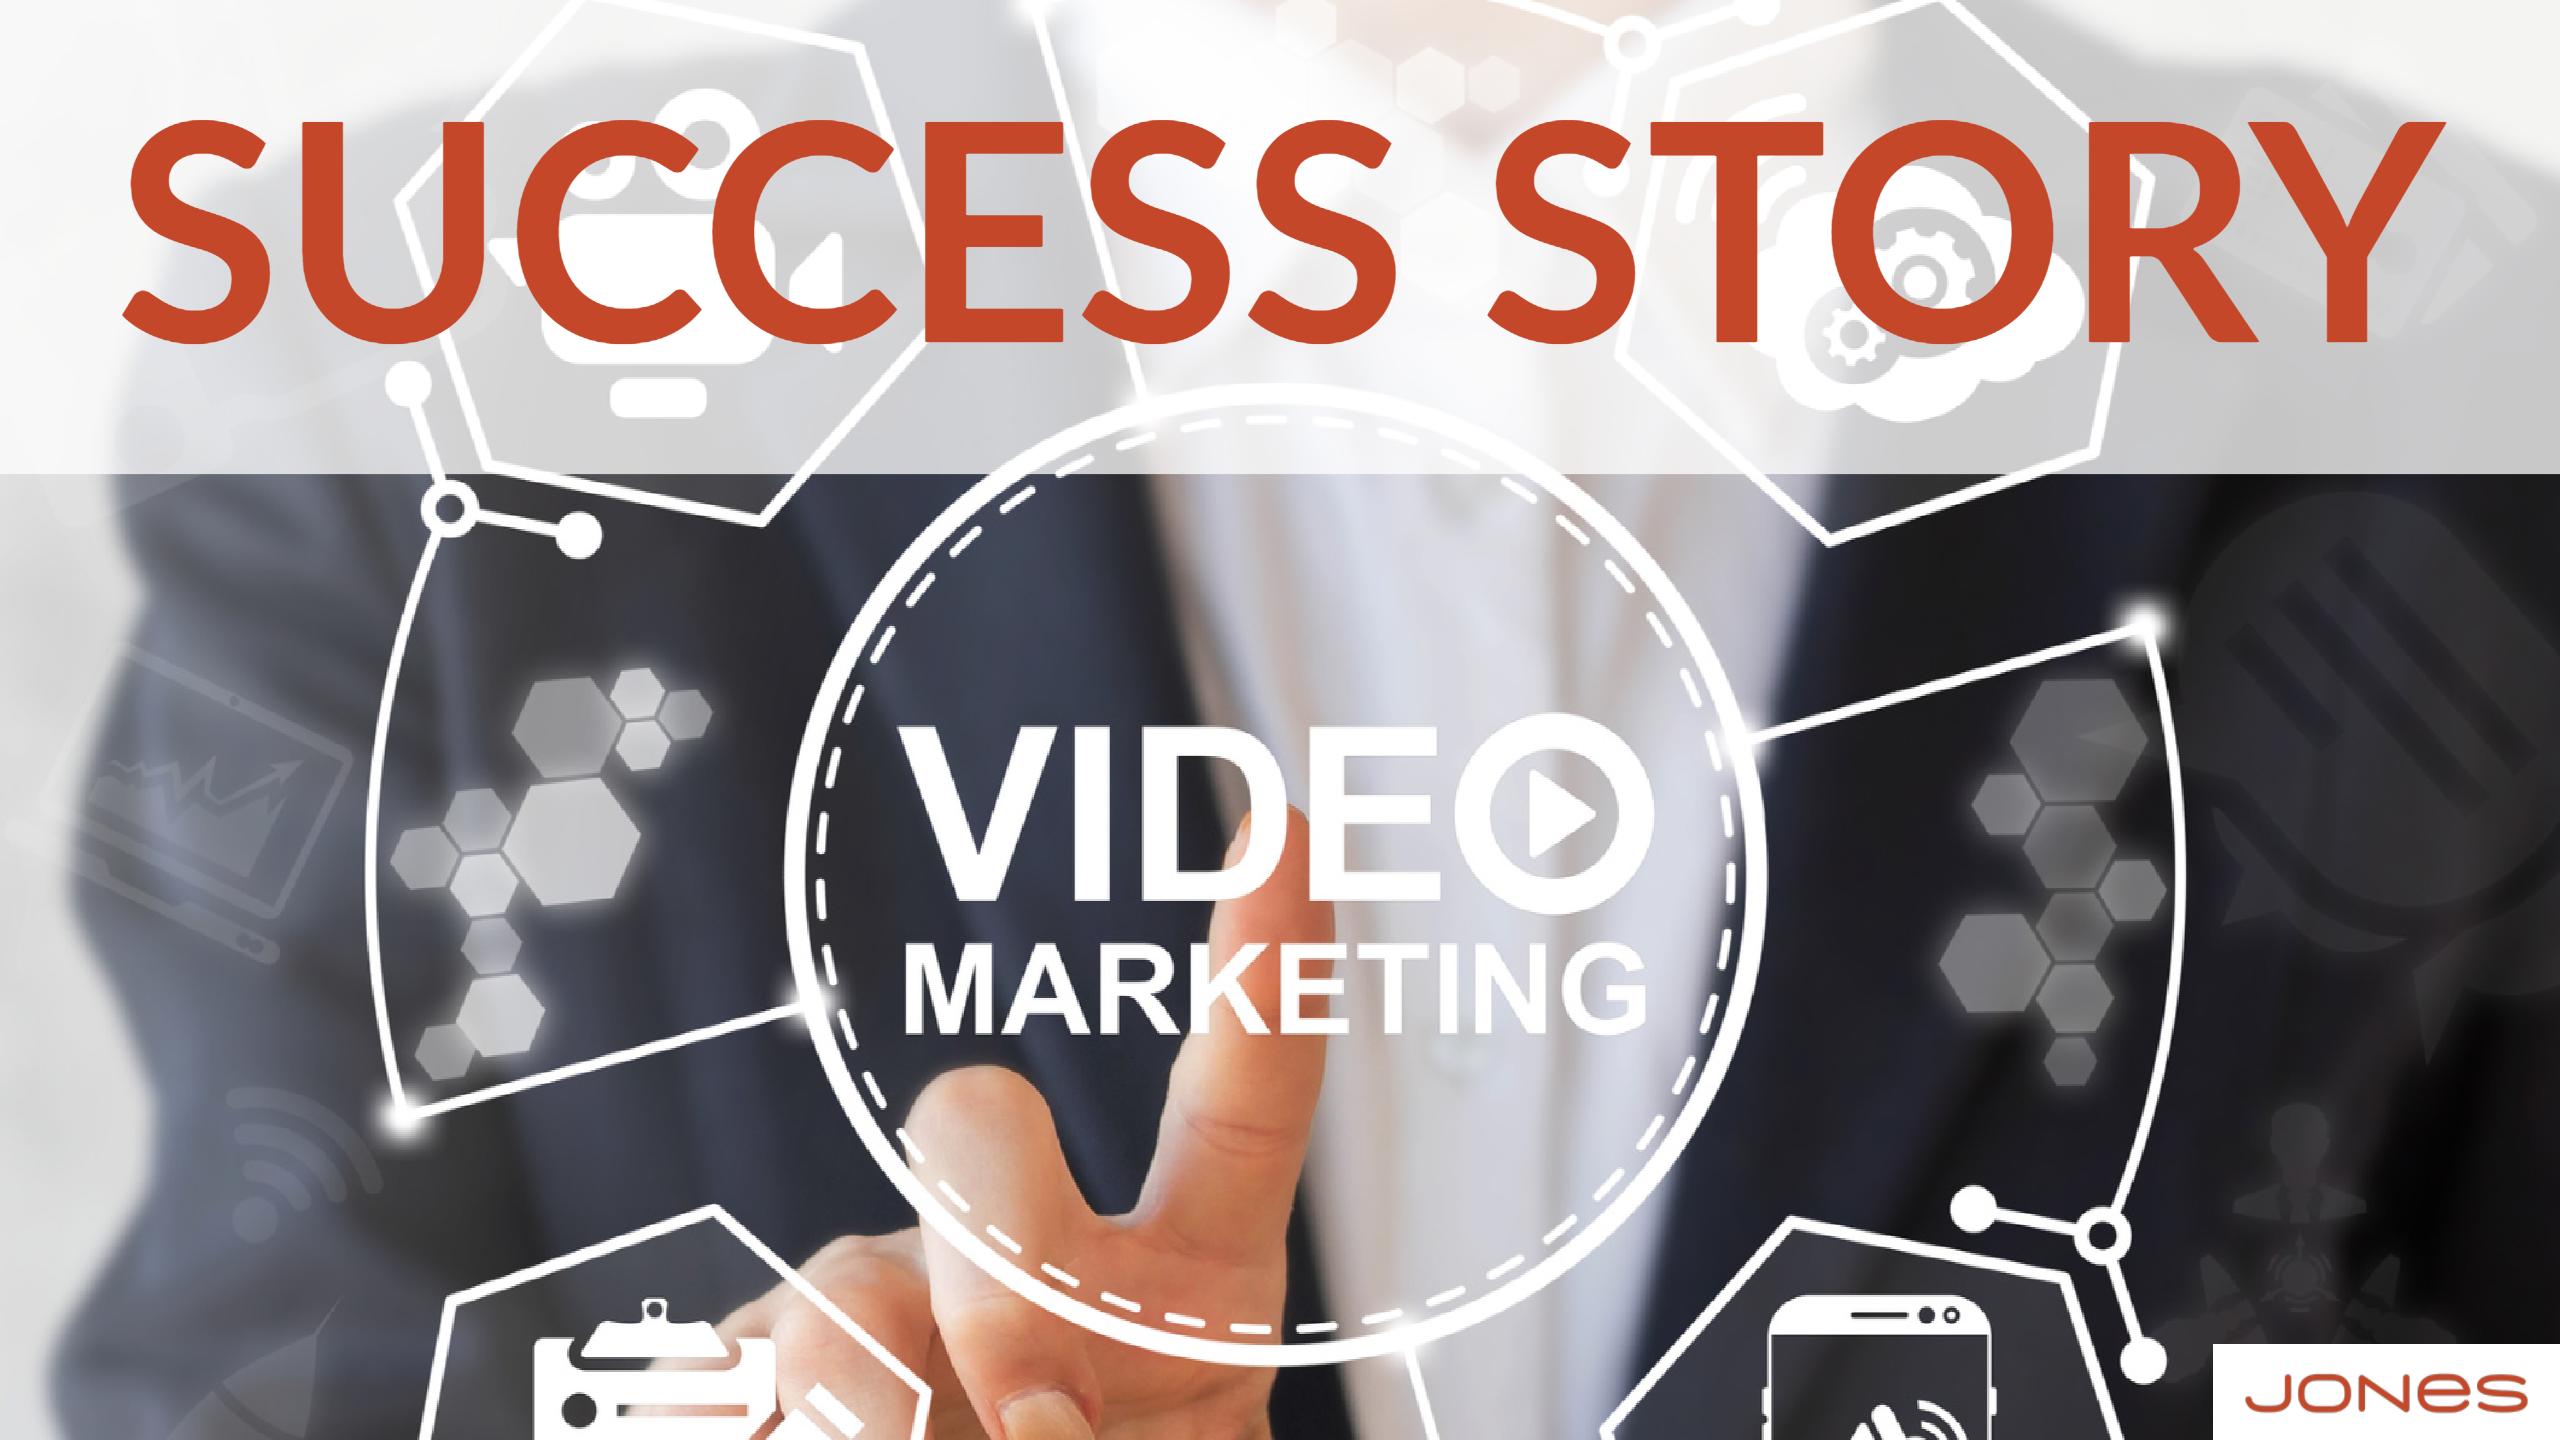 Secrets for Video Marketing Success: What West & JONES Did Right